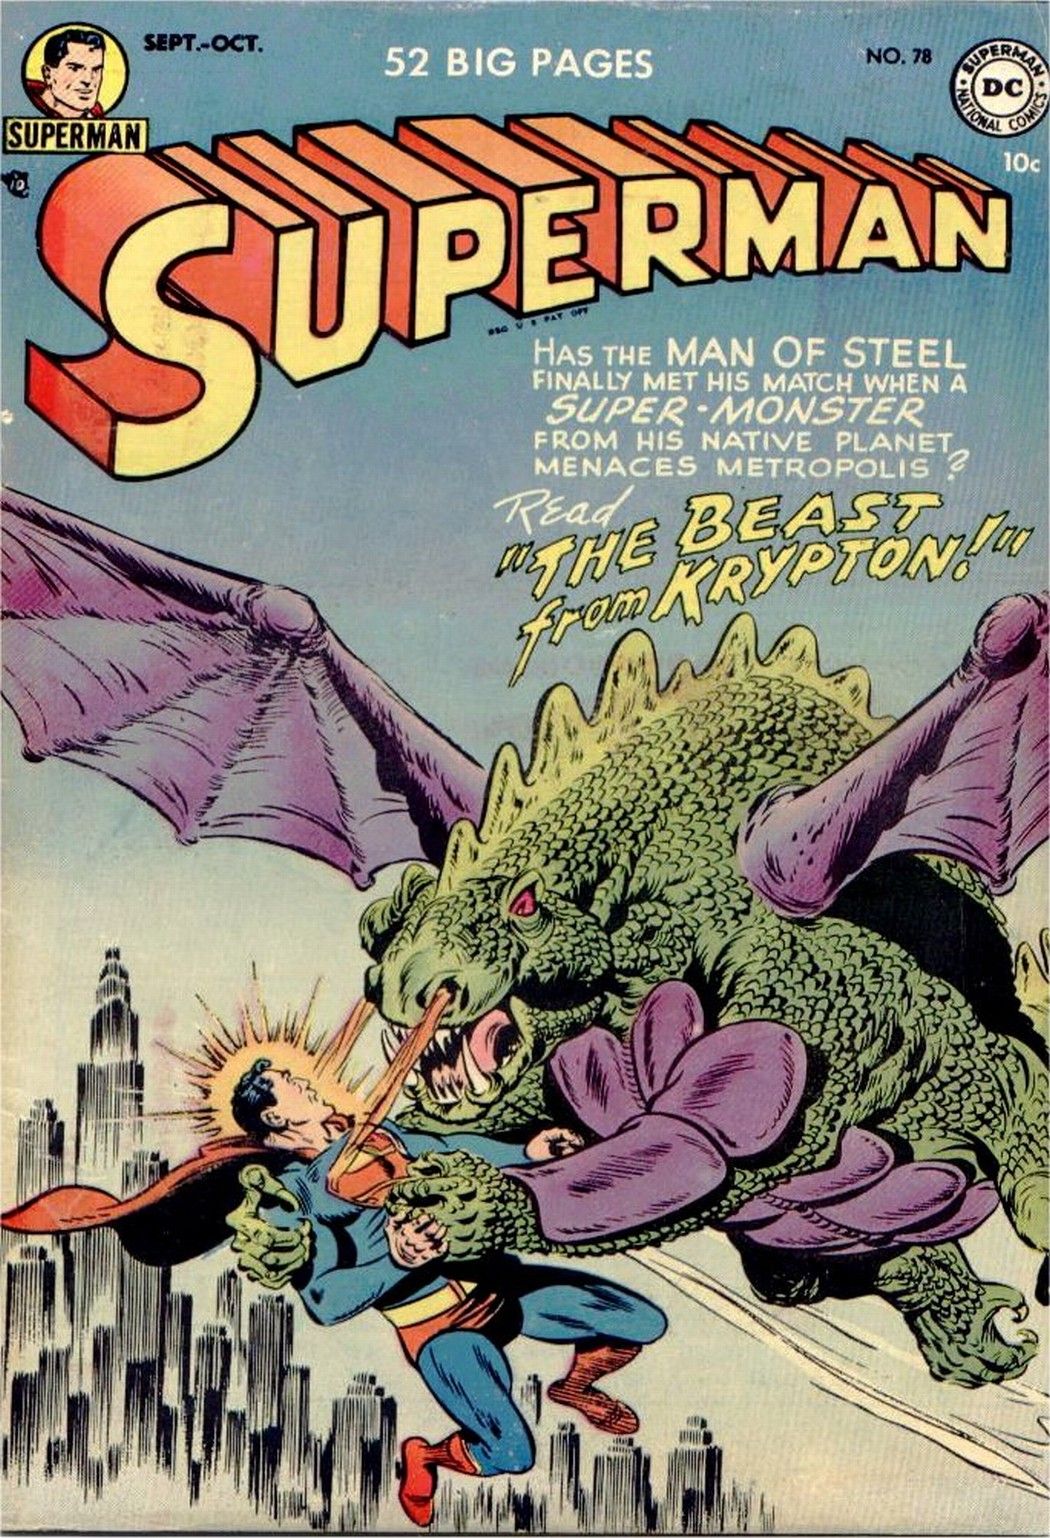 Superman fighting a beast from Krypton